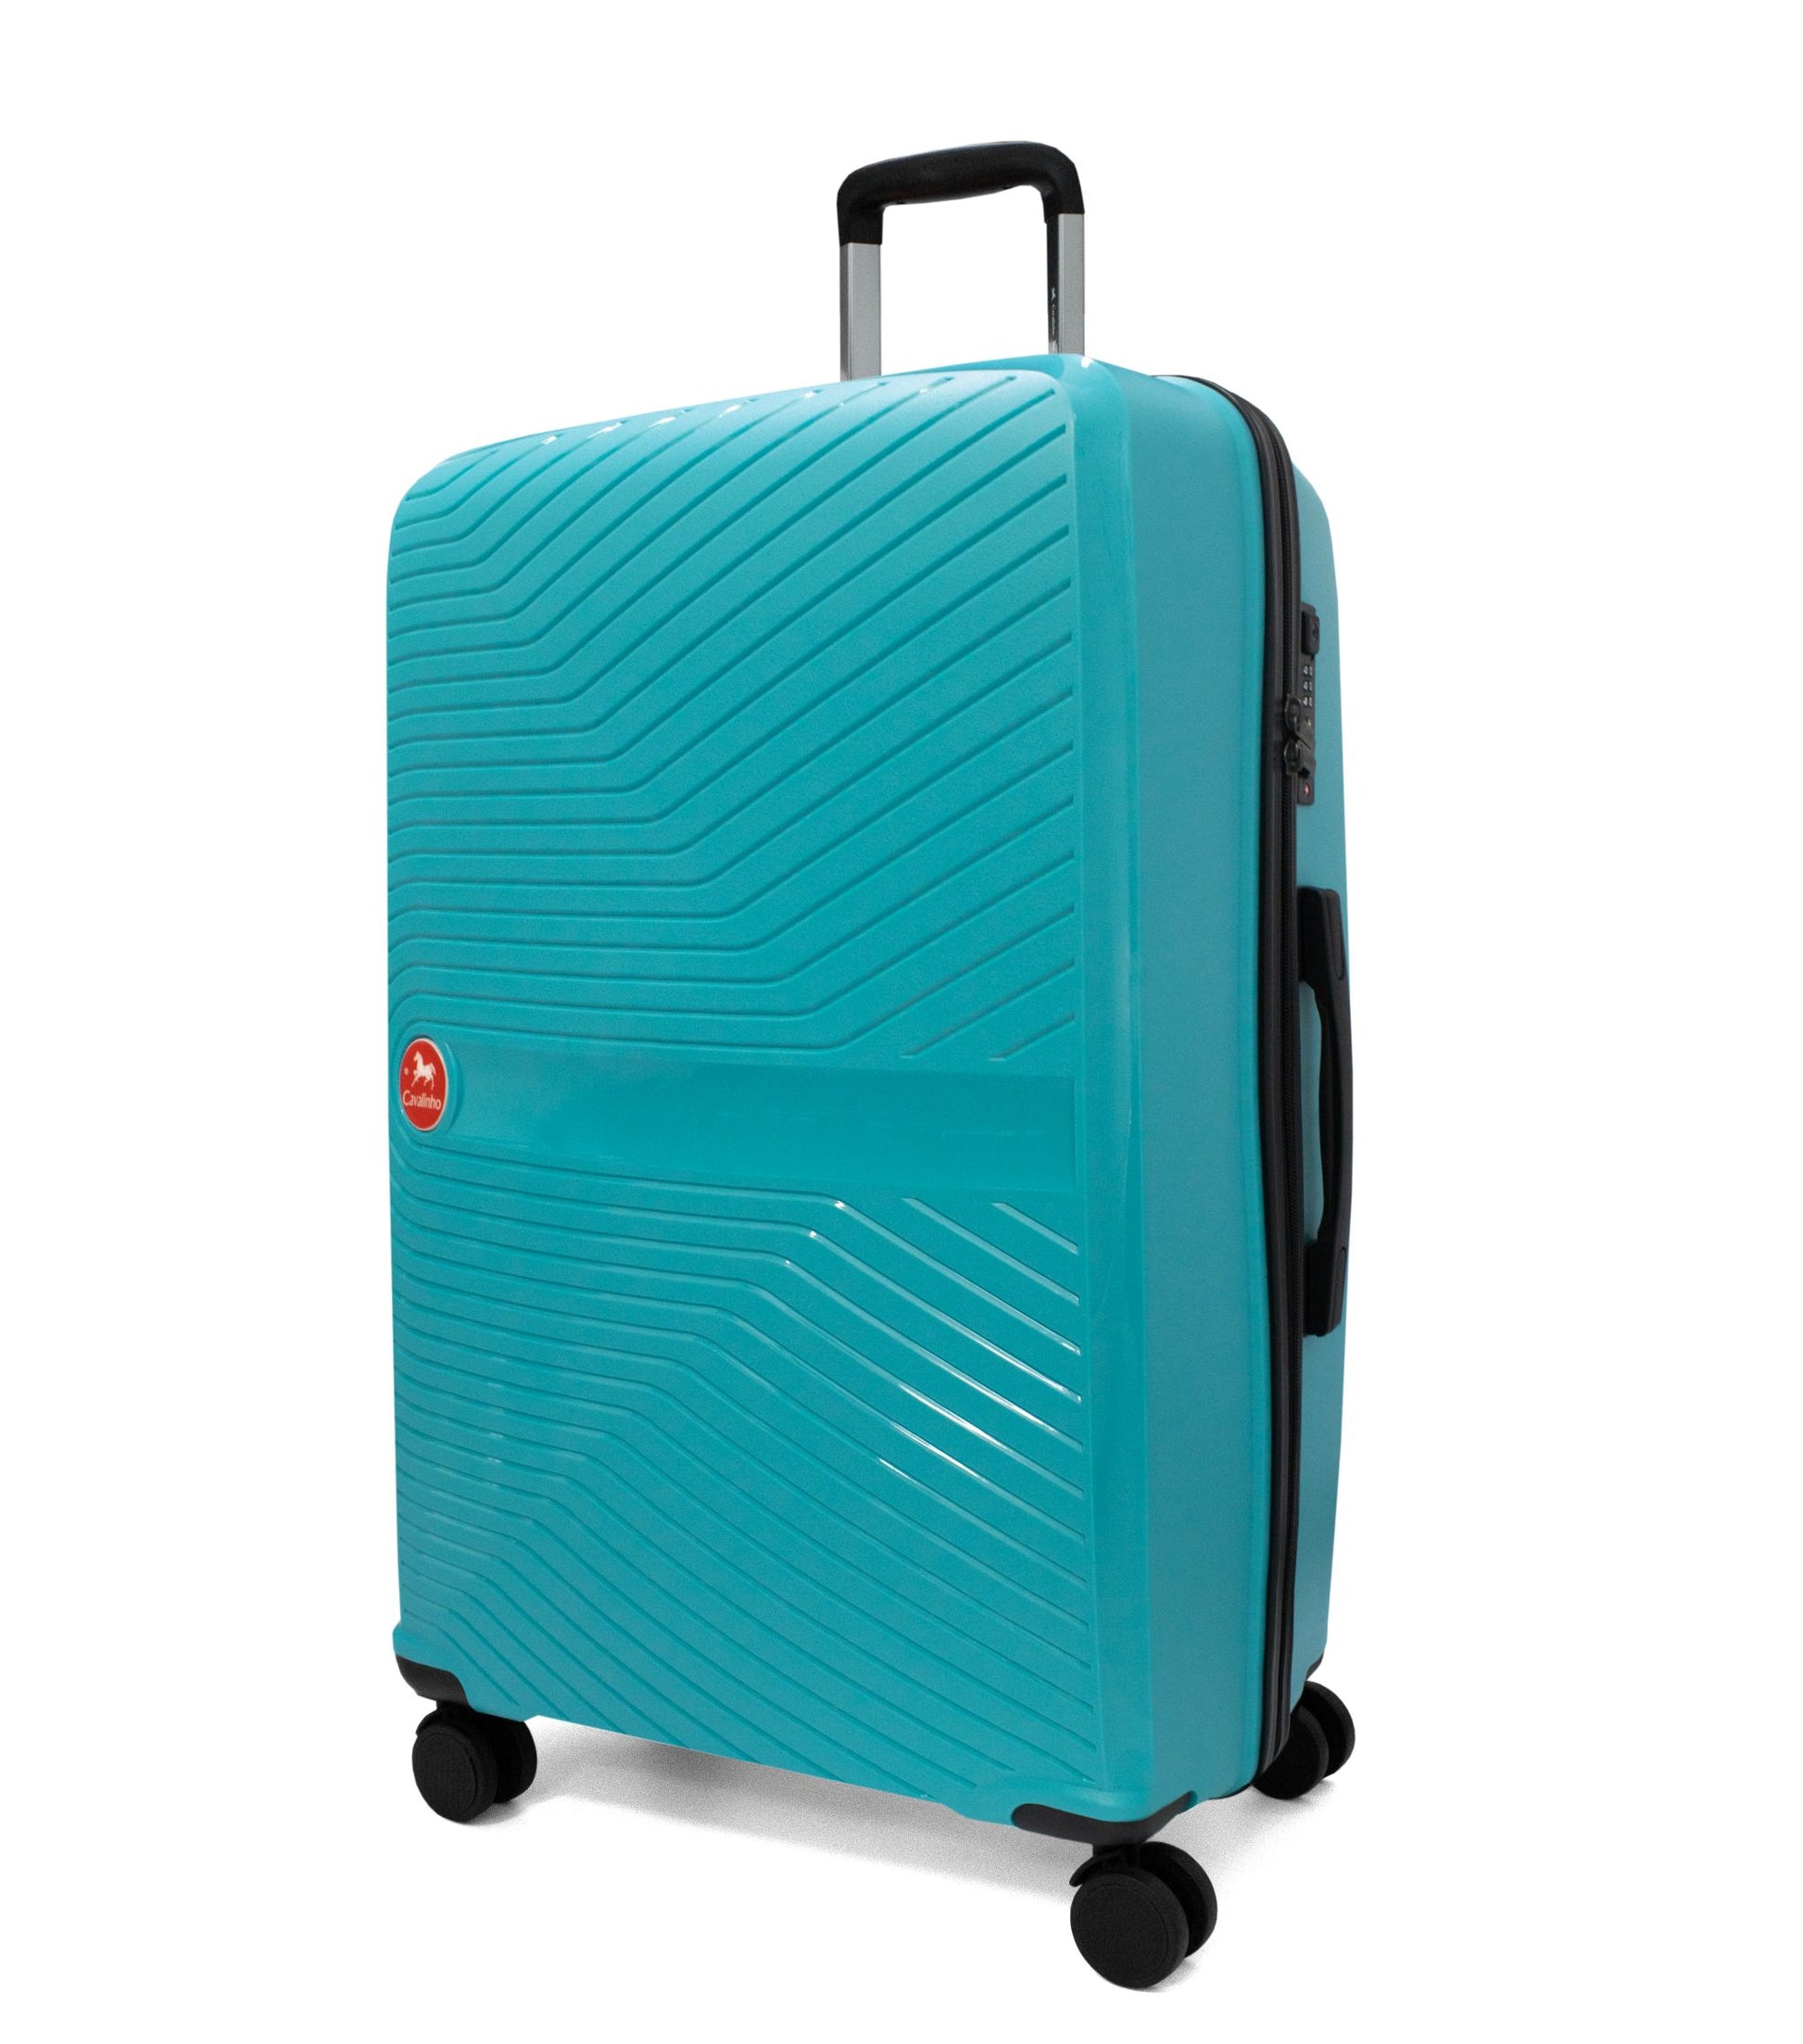 Cavalinho Colorful Check-in Hardside Luggage (28") - 28 inch DarkTurquoise - 68020004.25.28_2